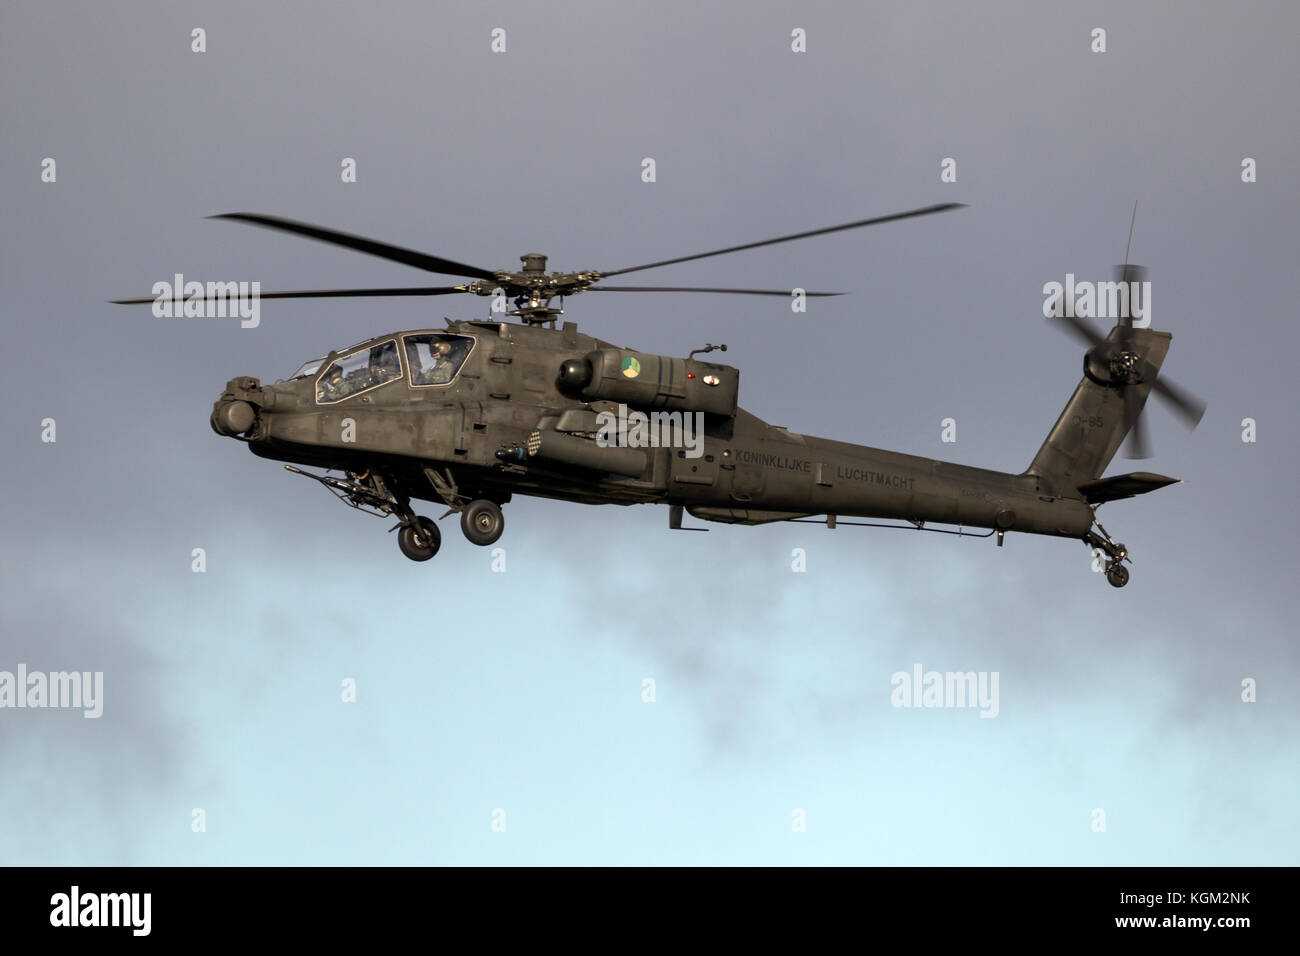 EINDHOVEN, THE NETHERLANDS - OCT 27, 2017: Royal Netherlands Air Force Boeing AH-64D Apache attack helicopter in flight. Stock Photo